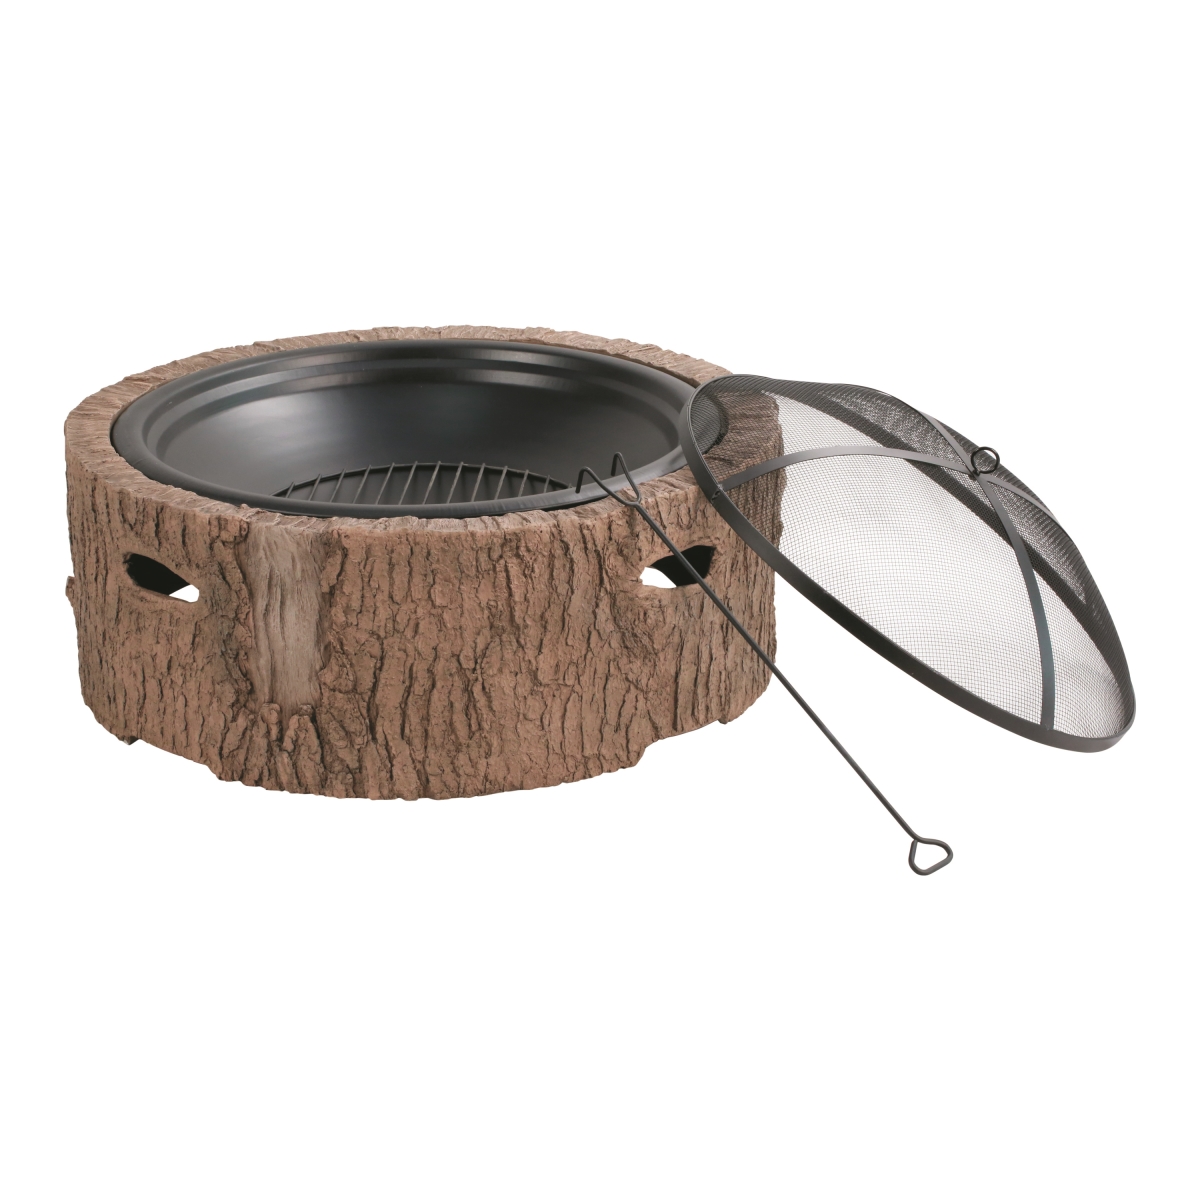 Mts-fp35-fb 35 In. Cast Stone, Wood Burning Fire Pit With 26 In. Mesh Spark Guard Screen, Log Poker, Faux Bois